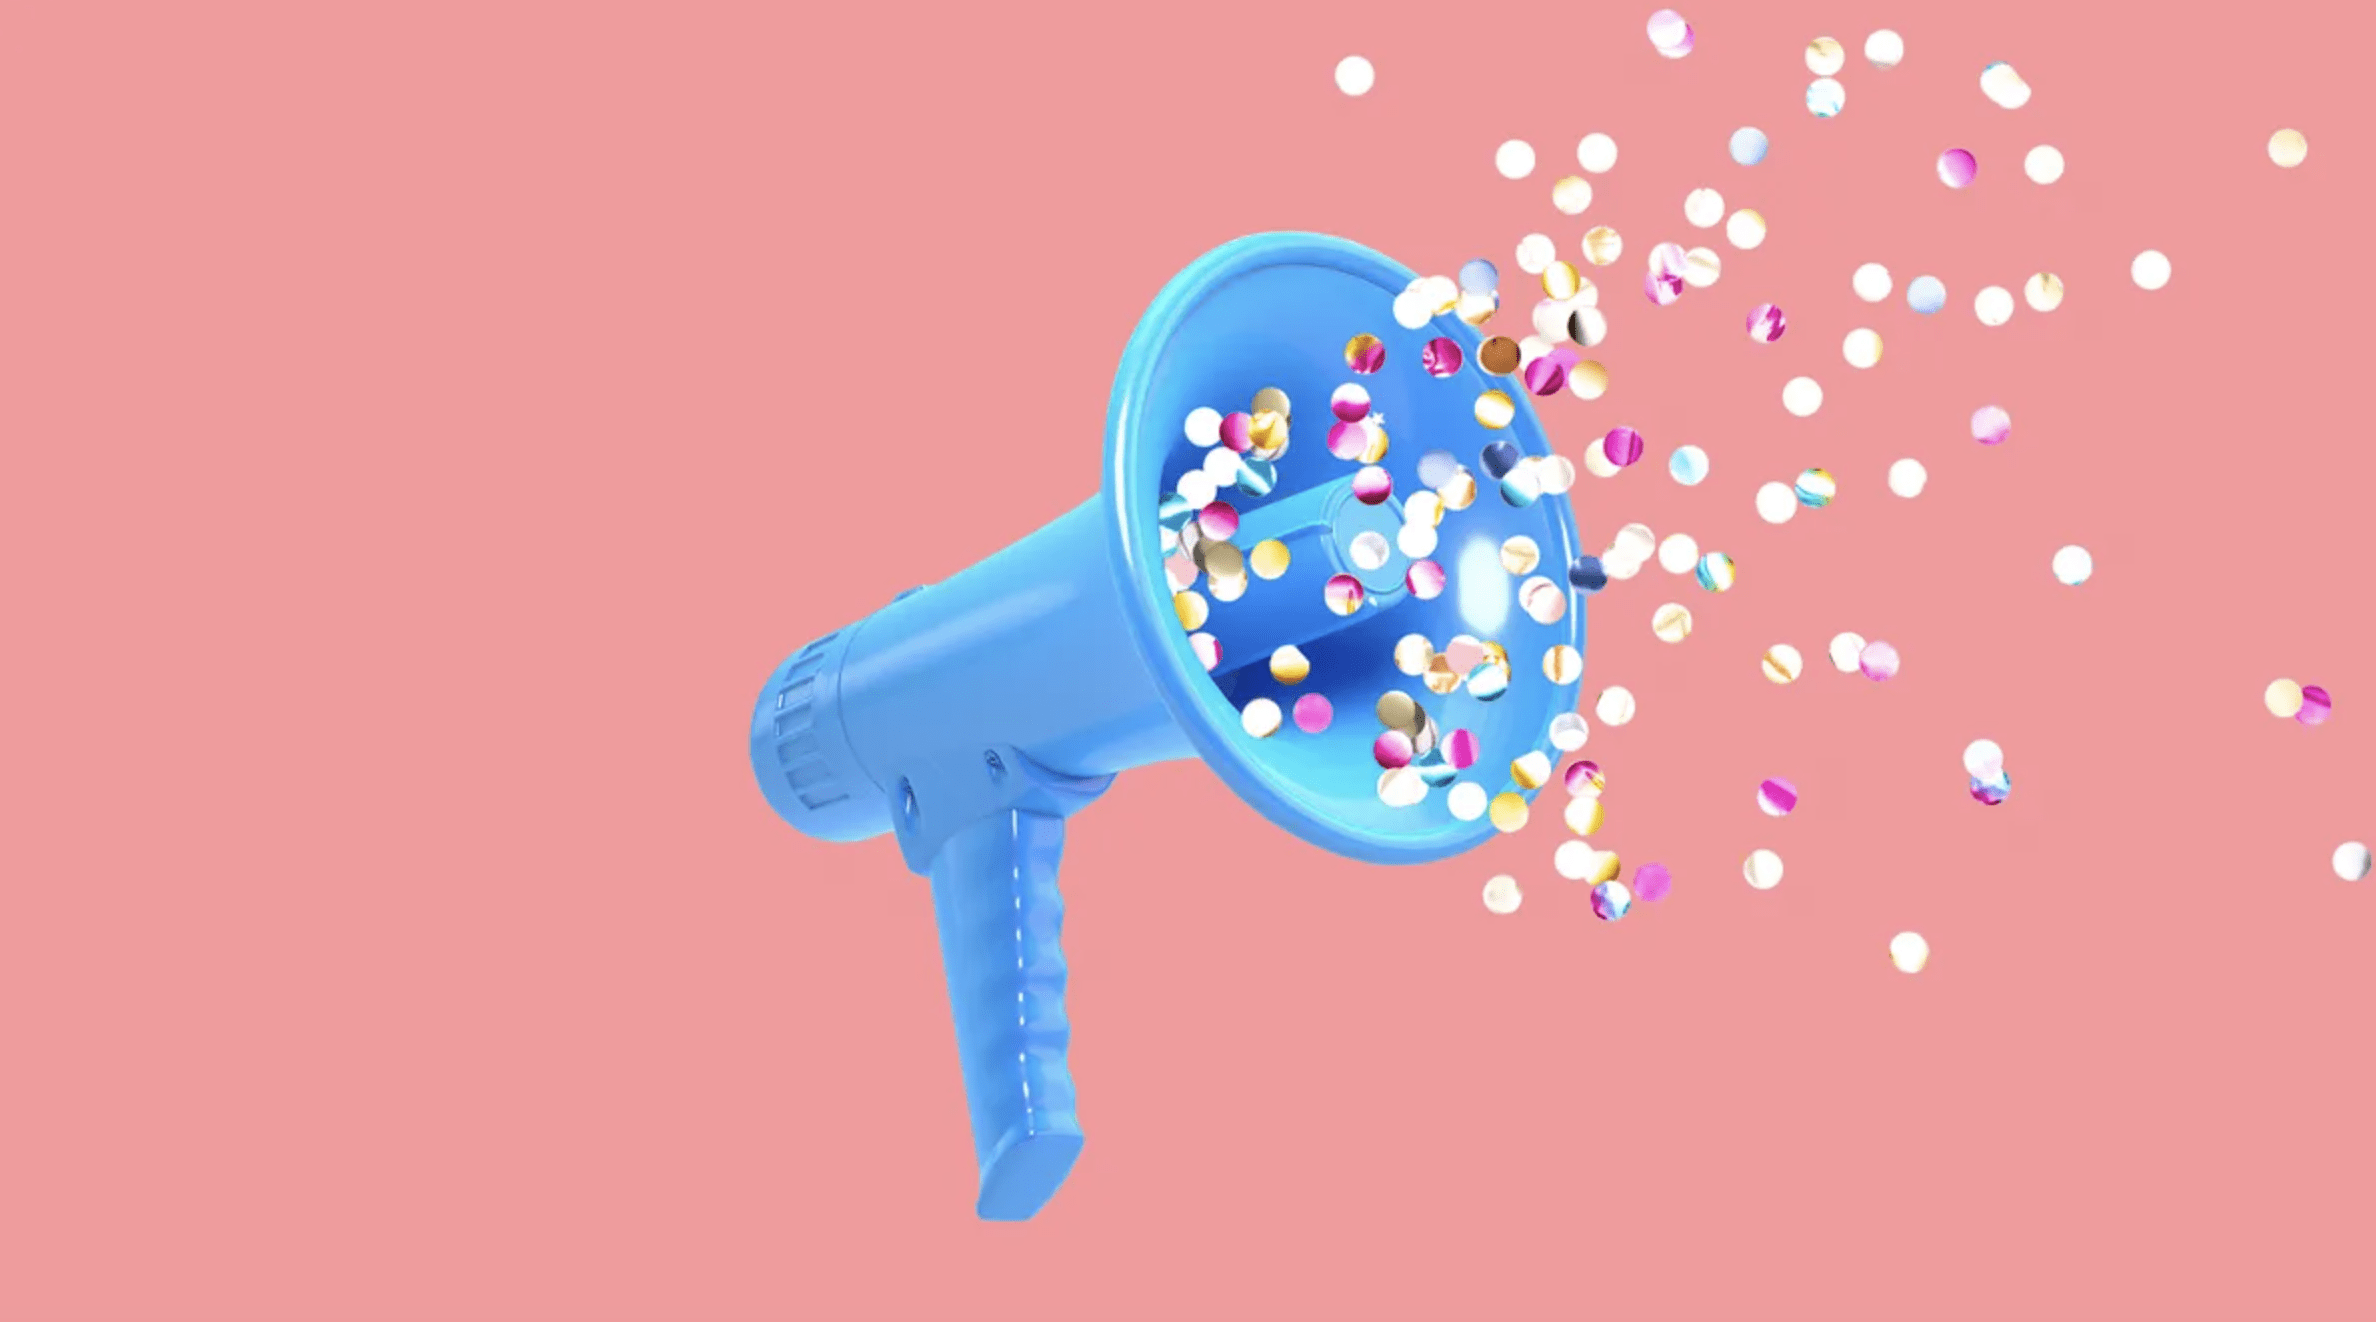 Megaphone shooting out confetti